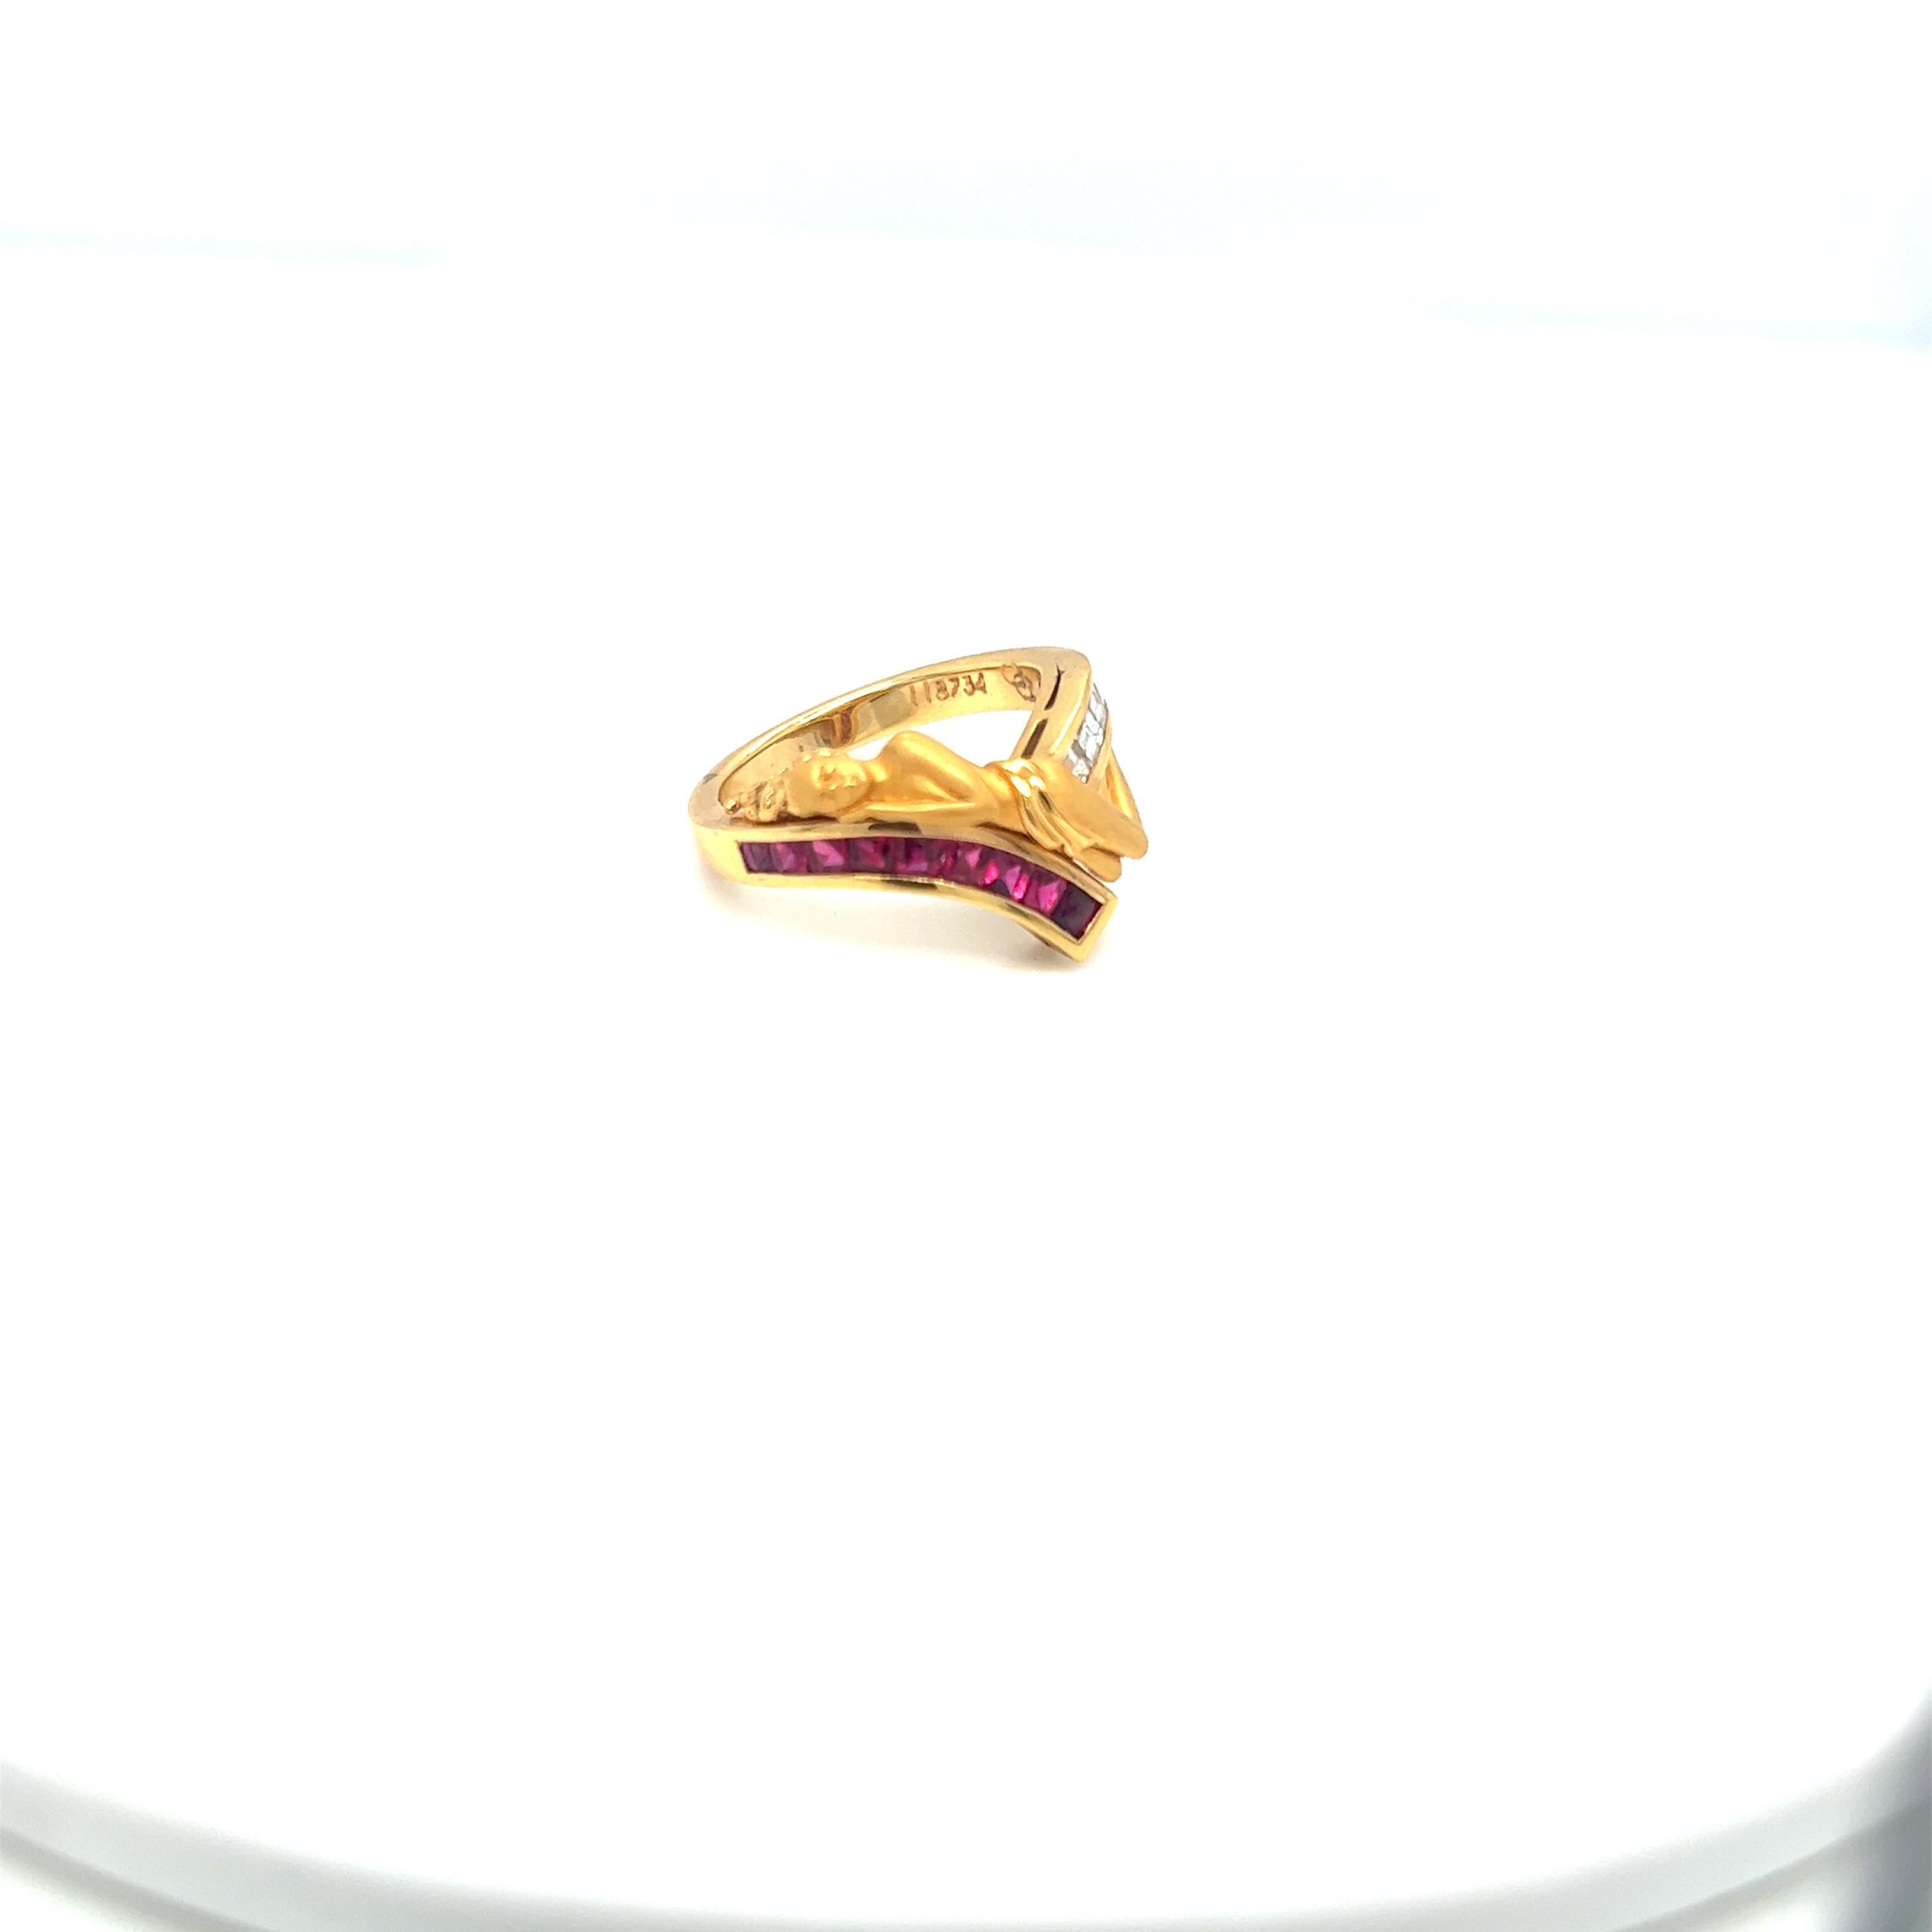 Art Nouveau Carrera Y Carrera 18KT Yellow Gold Reclining Nude Ring with Diamonds & Rubies For Sale